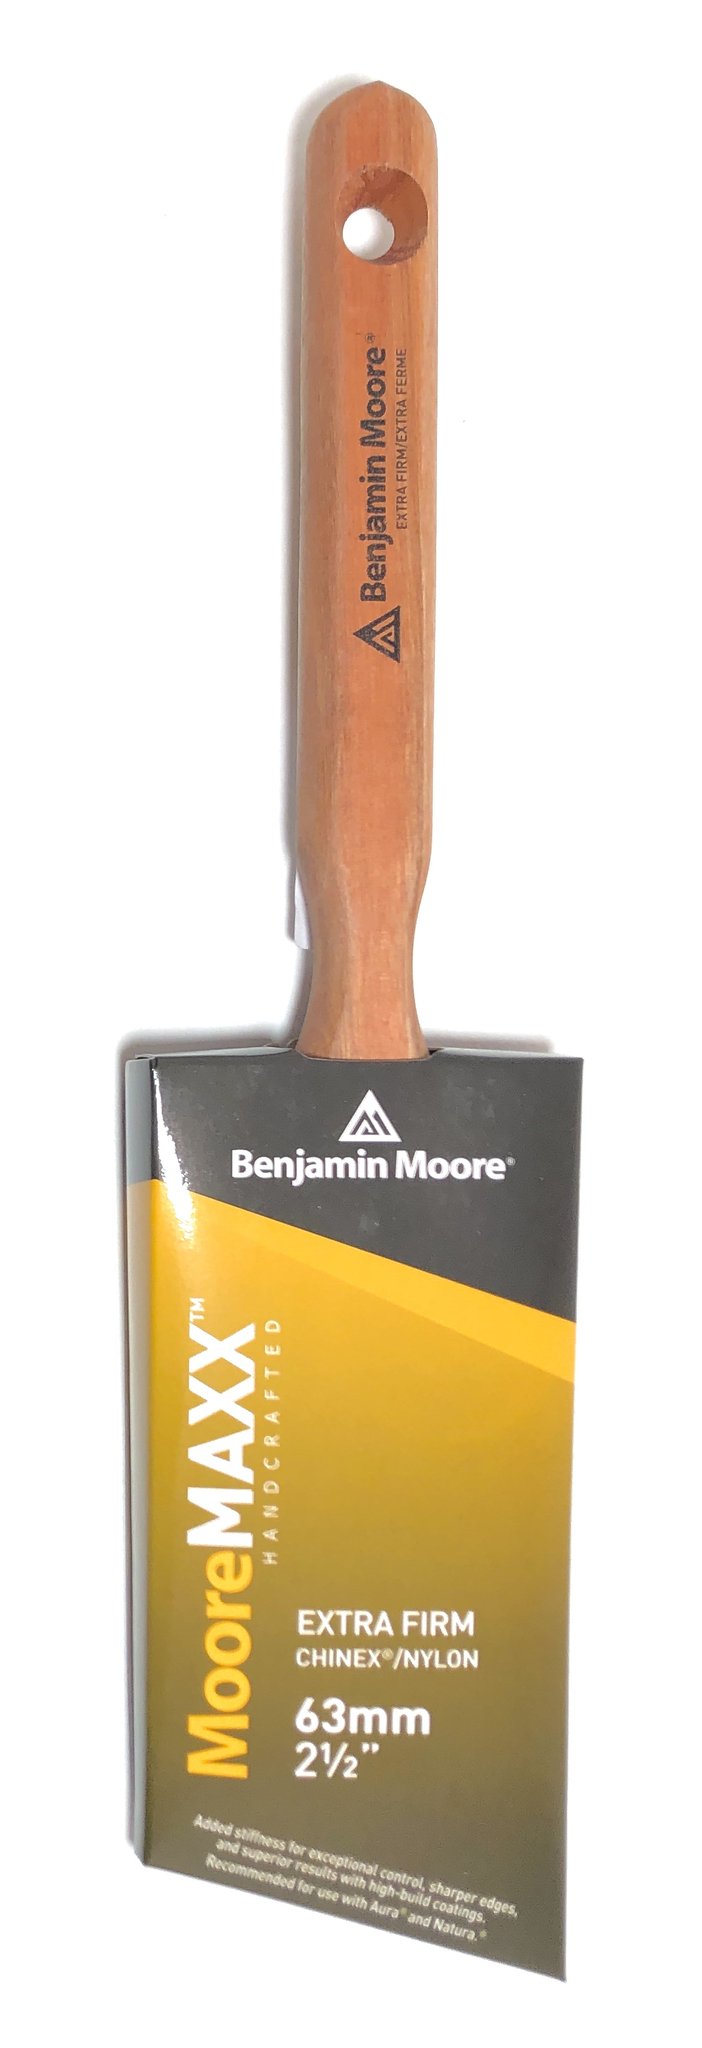 MooreMAXX 2 ½" Extra Firm Angle Sash Brush     MooreMAXX™ is a full line of premium applicators. All the brushes are handcrafted from top quality extra firm polyester/nylon filaments. They offer exceptional control and provide superior results in high-build coatings. Recommended for use with Aura ® , Regal ® Select, and Benjamin Moore Natura™.